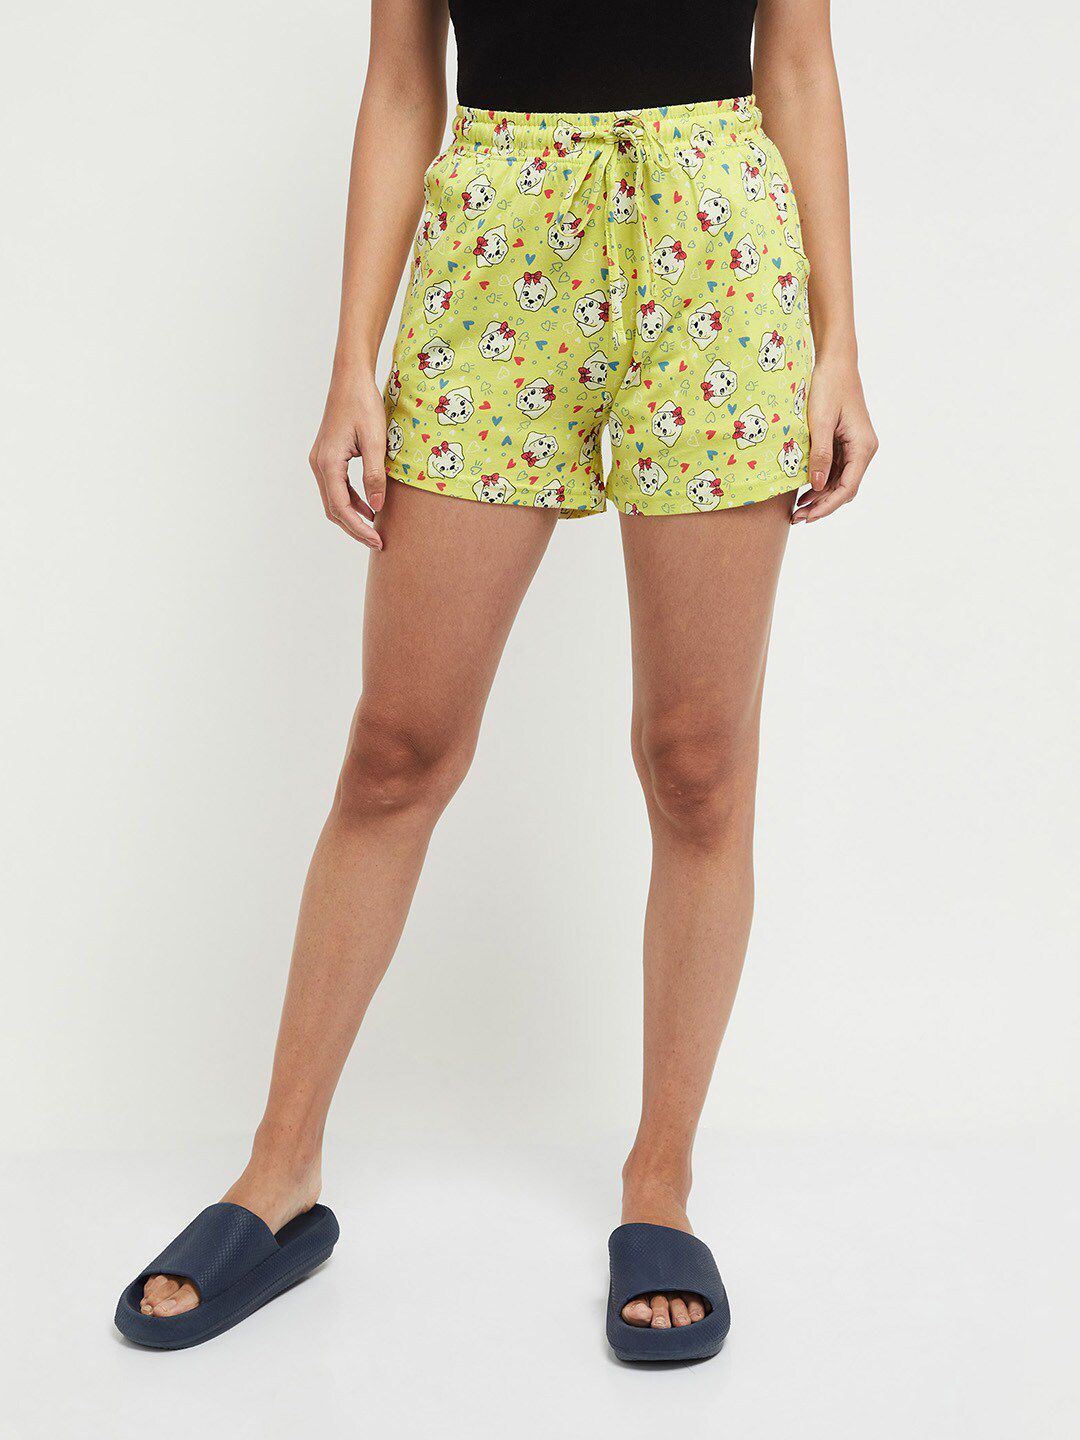 max Women Lime Green & White Printed Lounge Shorts Price in India